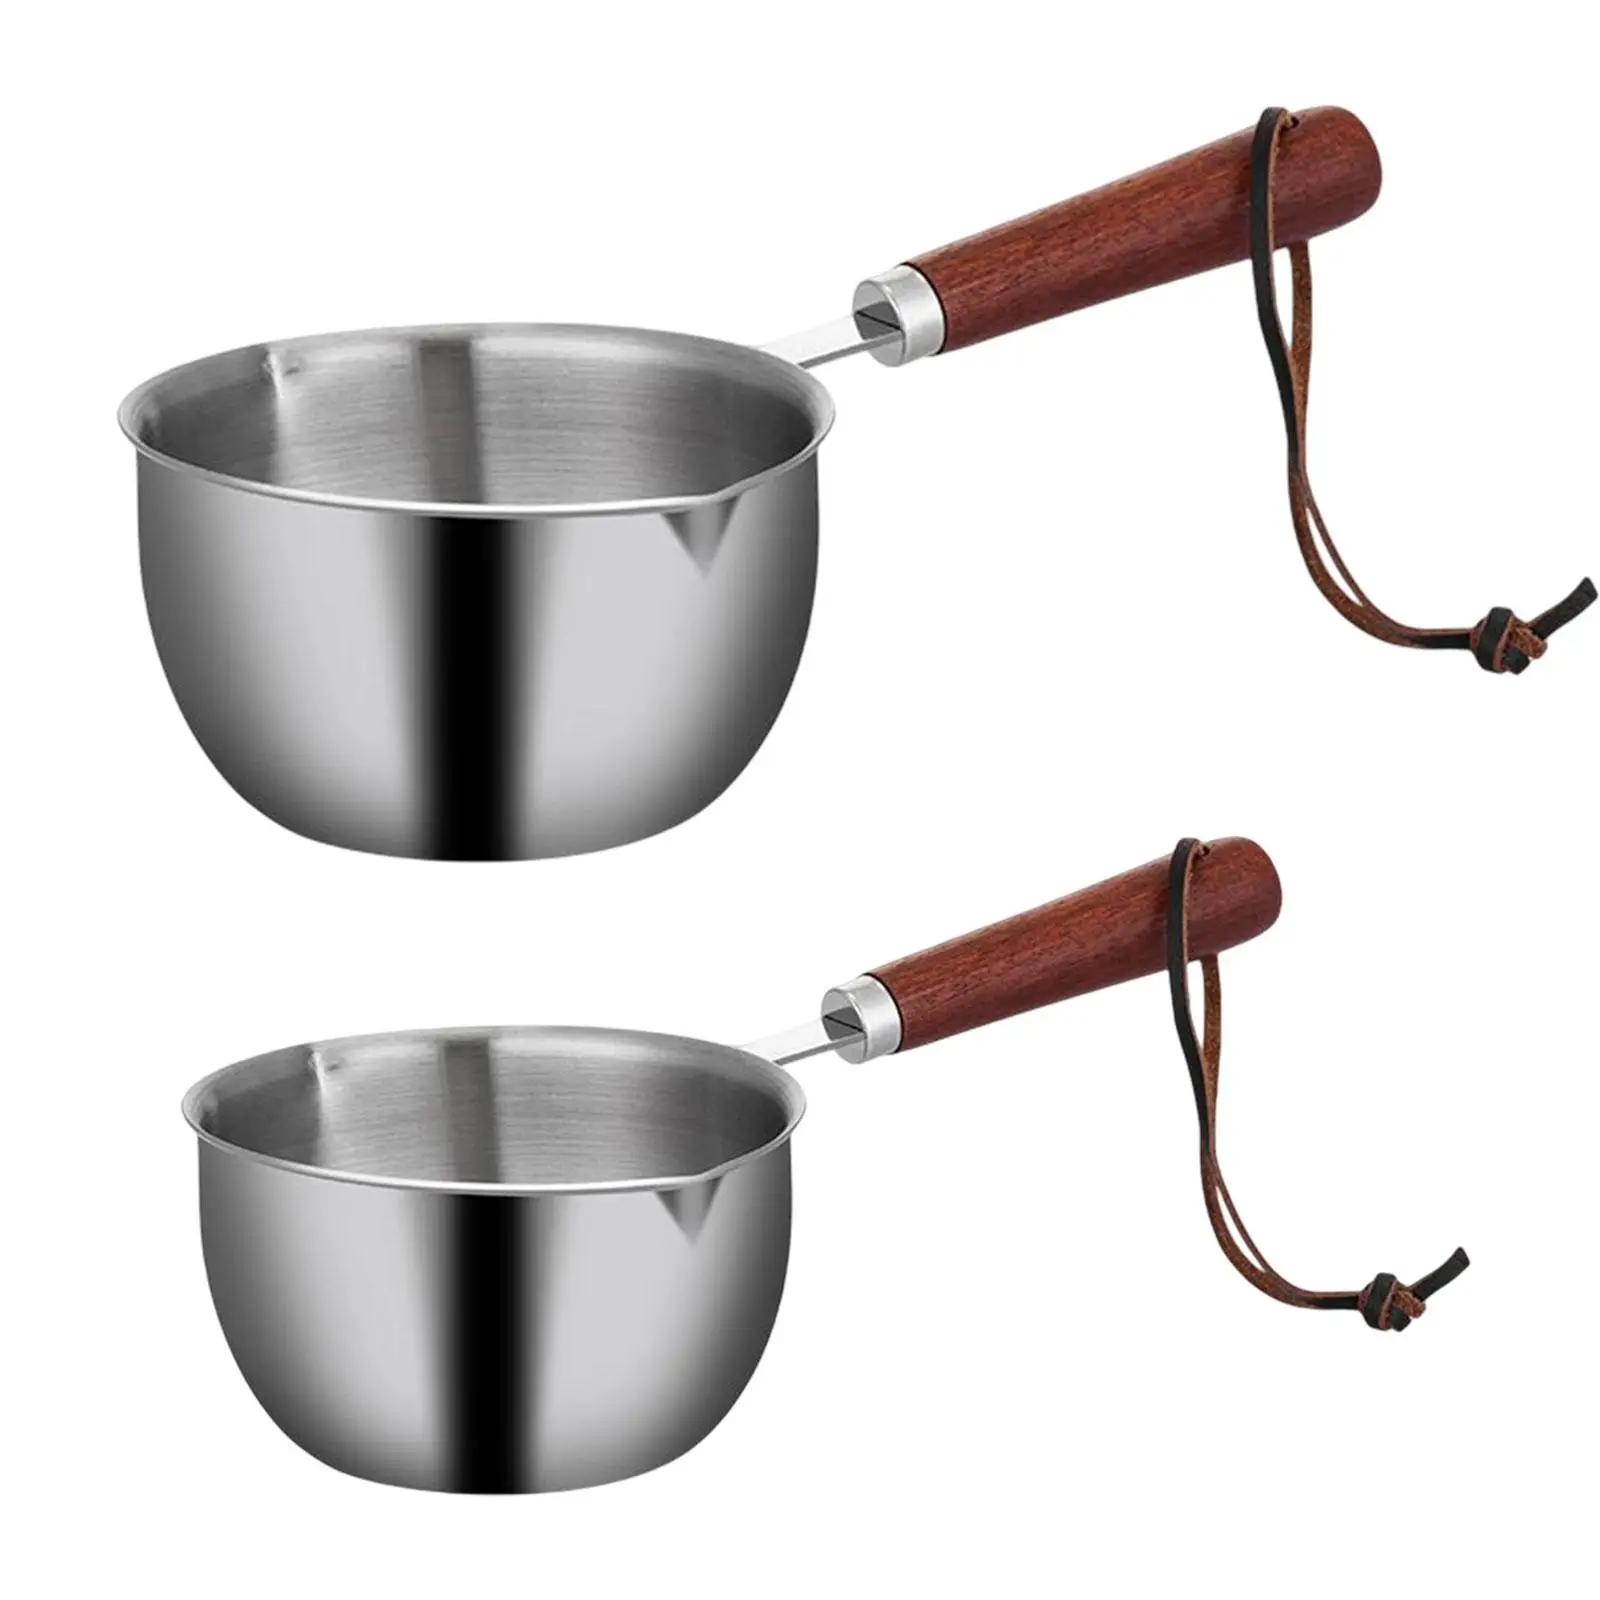 Hot Oil Pan Small Cookware Dining Room Practical Multipurpose Universal